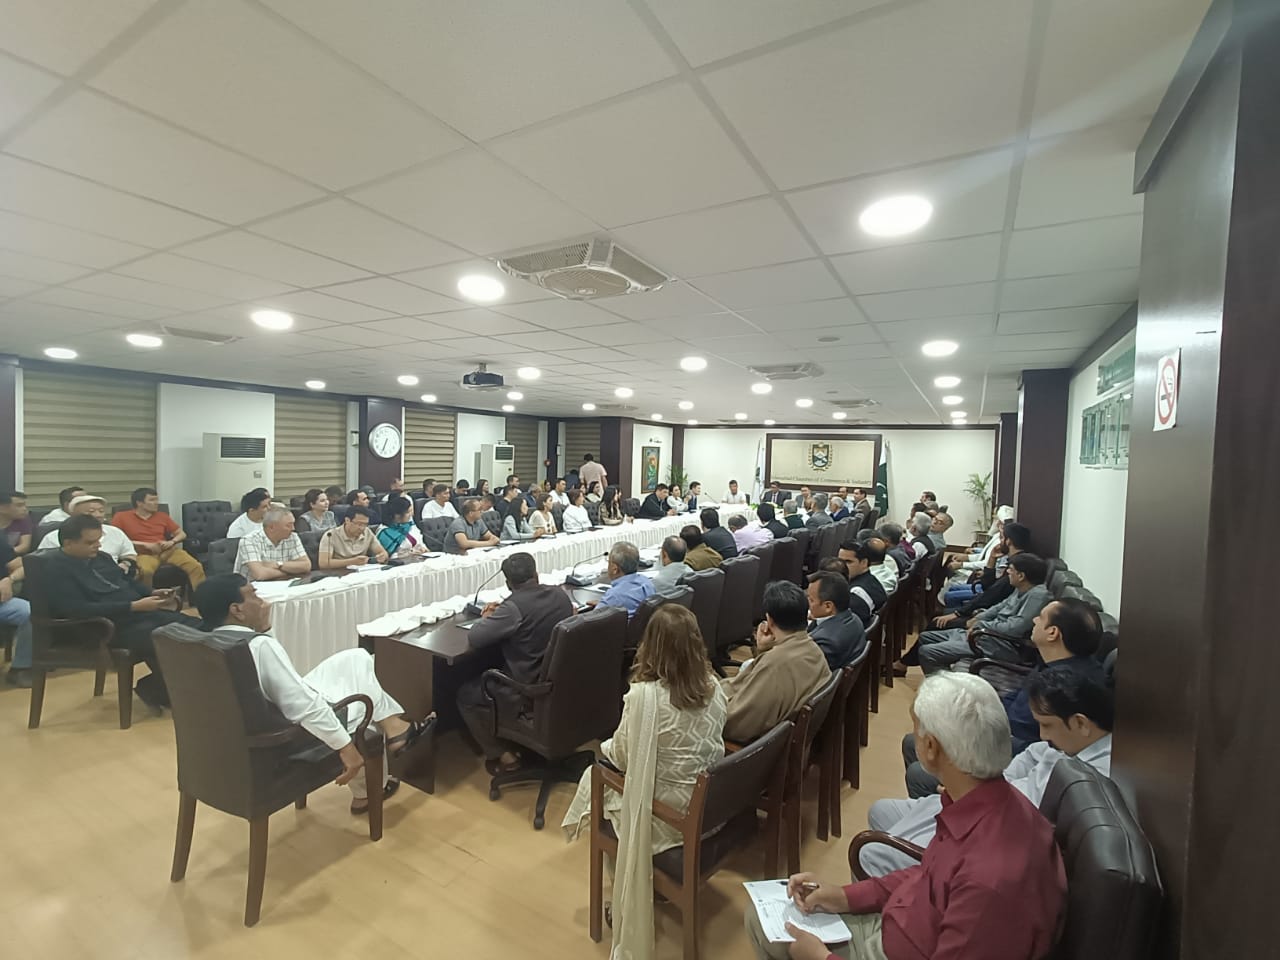 The Pakistan-Kyrgyz Republic trade and investment forum was held in the cities of Islamabad and Lahore of the Islamic Republic of Pakistan with the participation of representatives of the Kyrgyz and Pakistani business circles